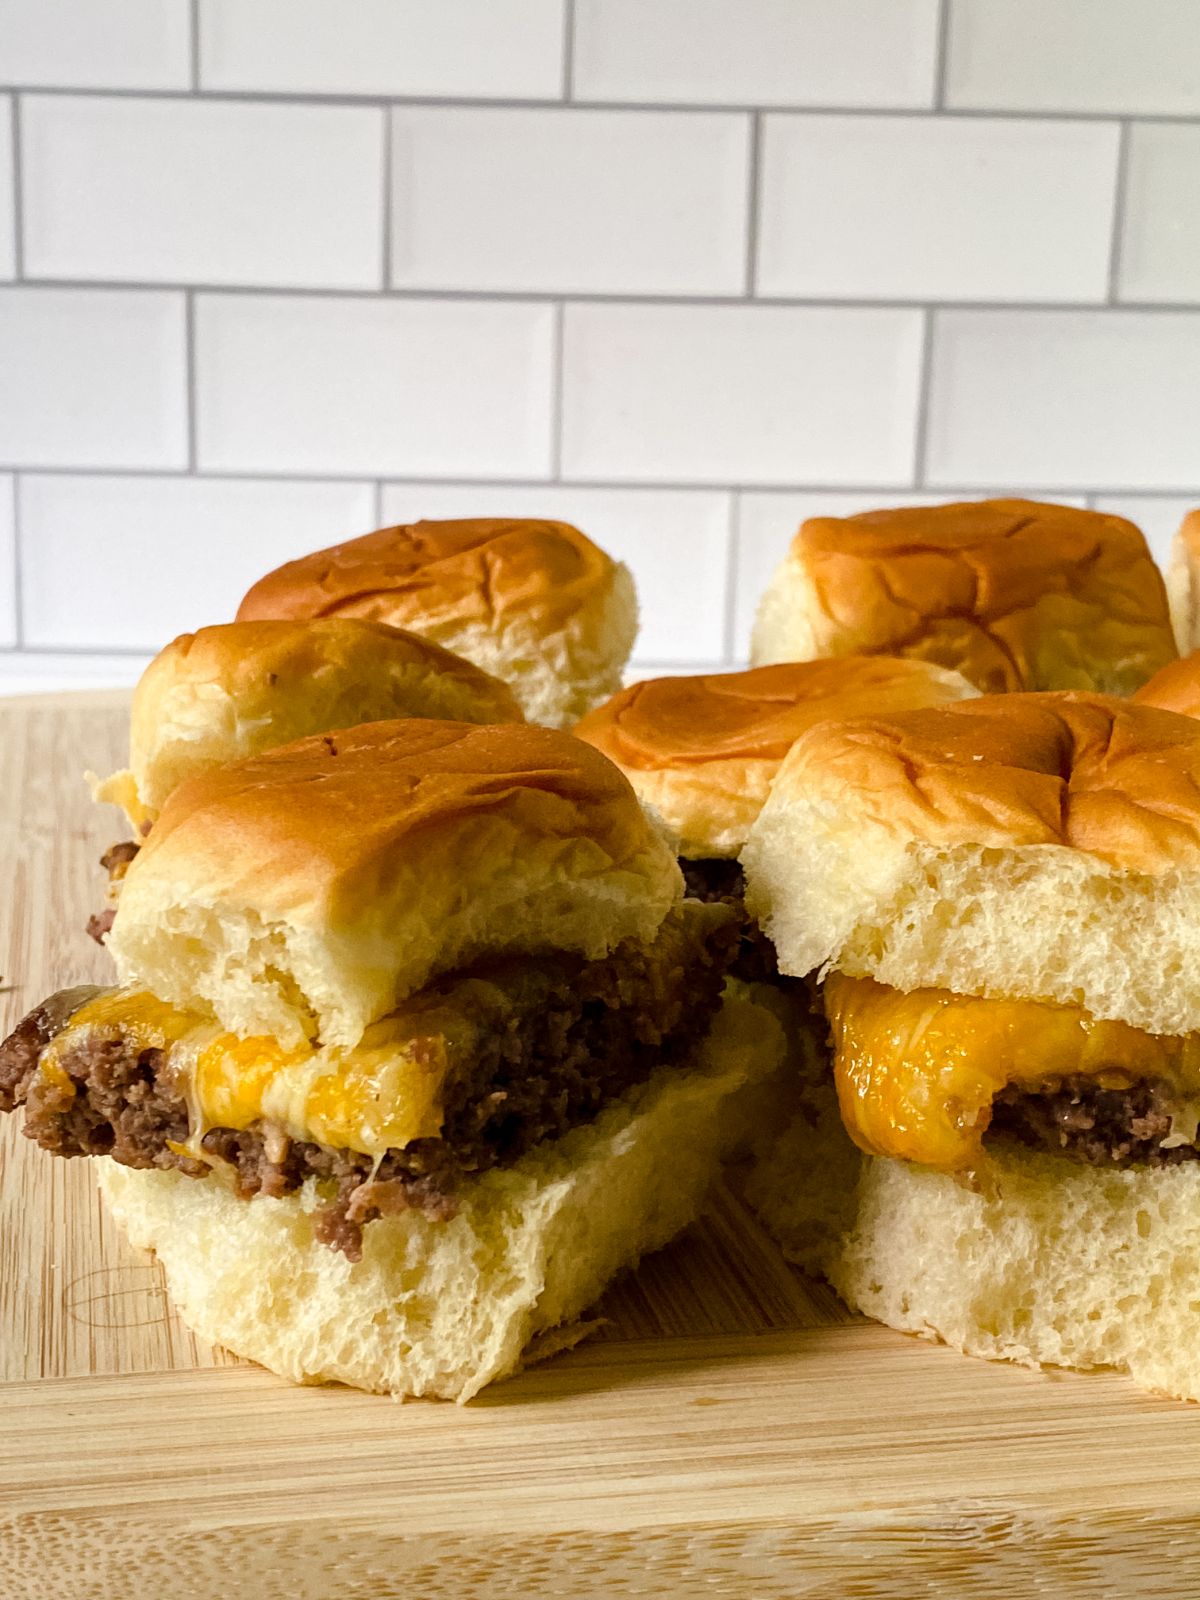 five cheeseburger sliders on cutting board in front of white subway tile